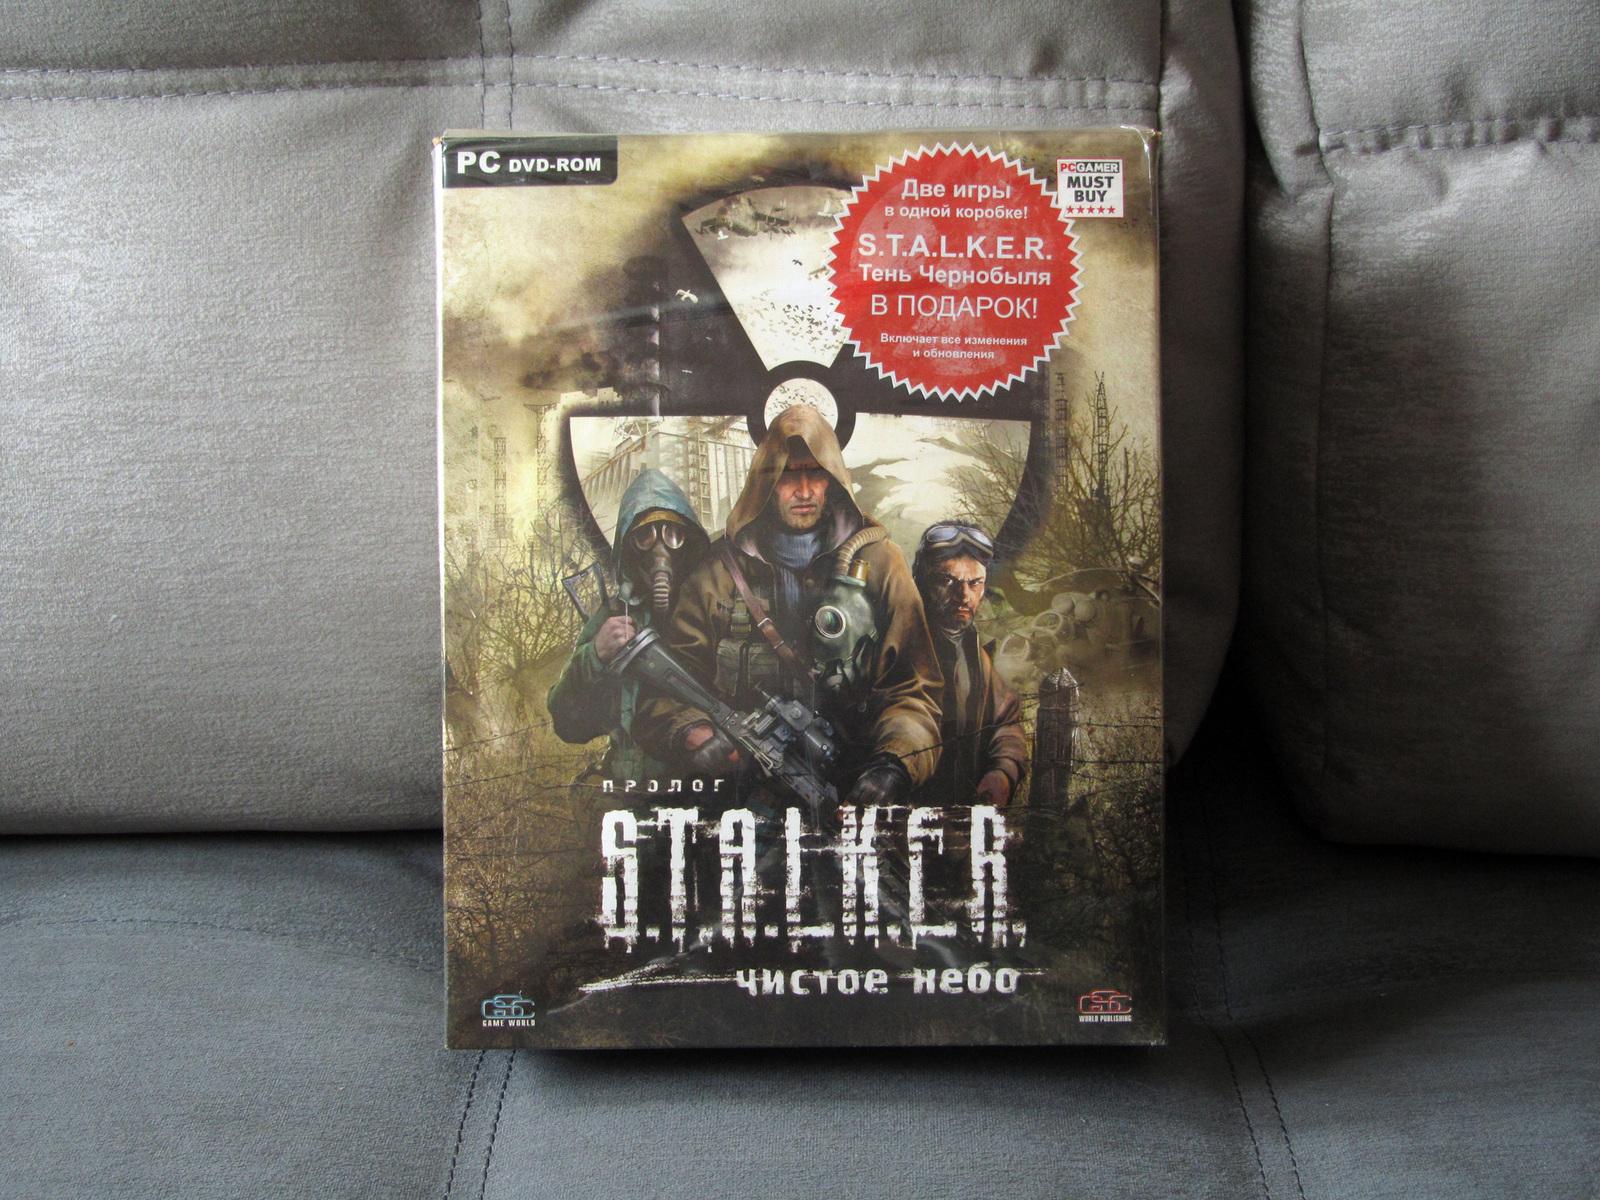 S.T.A.L.K.E.R.: Clear Sky - Prologue cover or packaging material - MobyGames